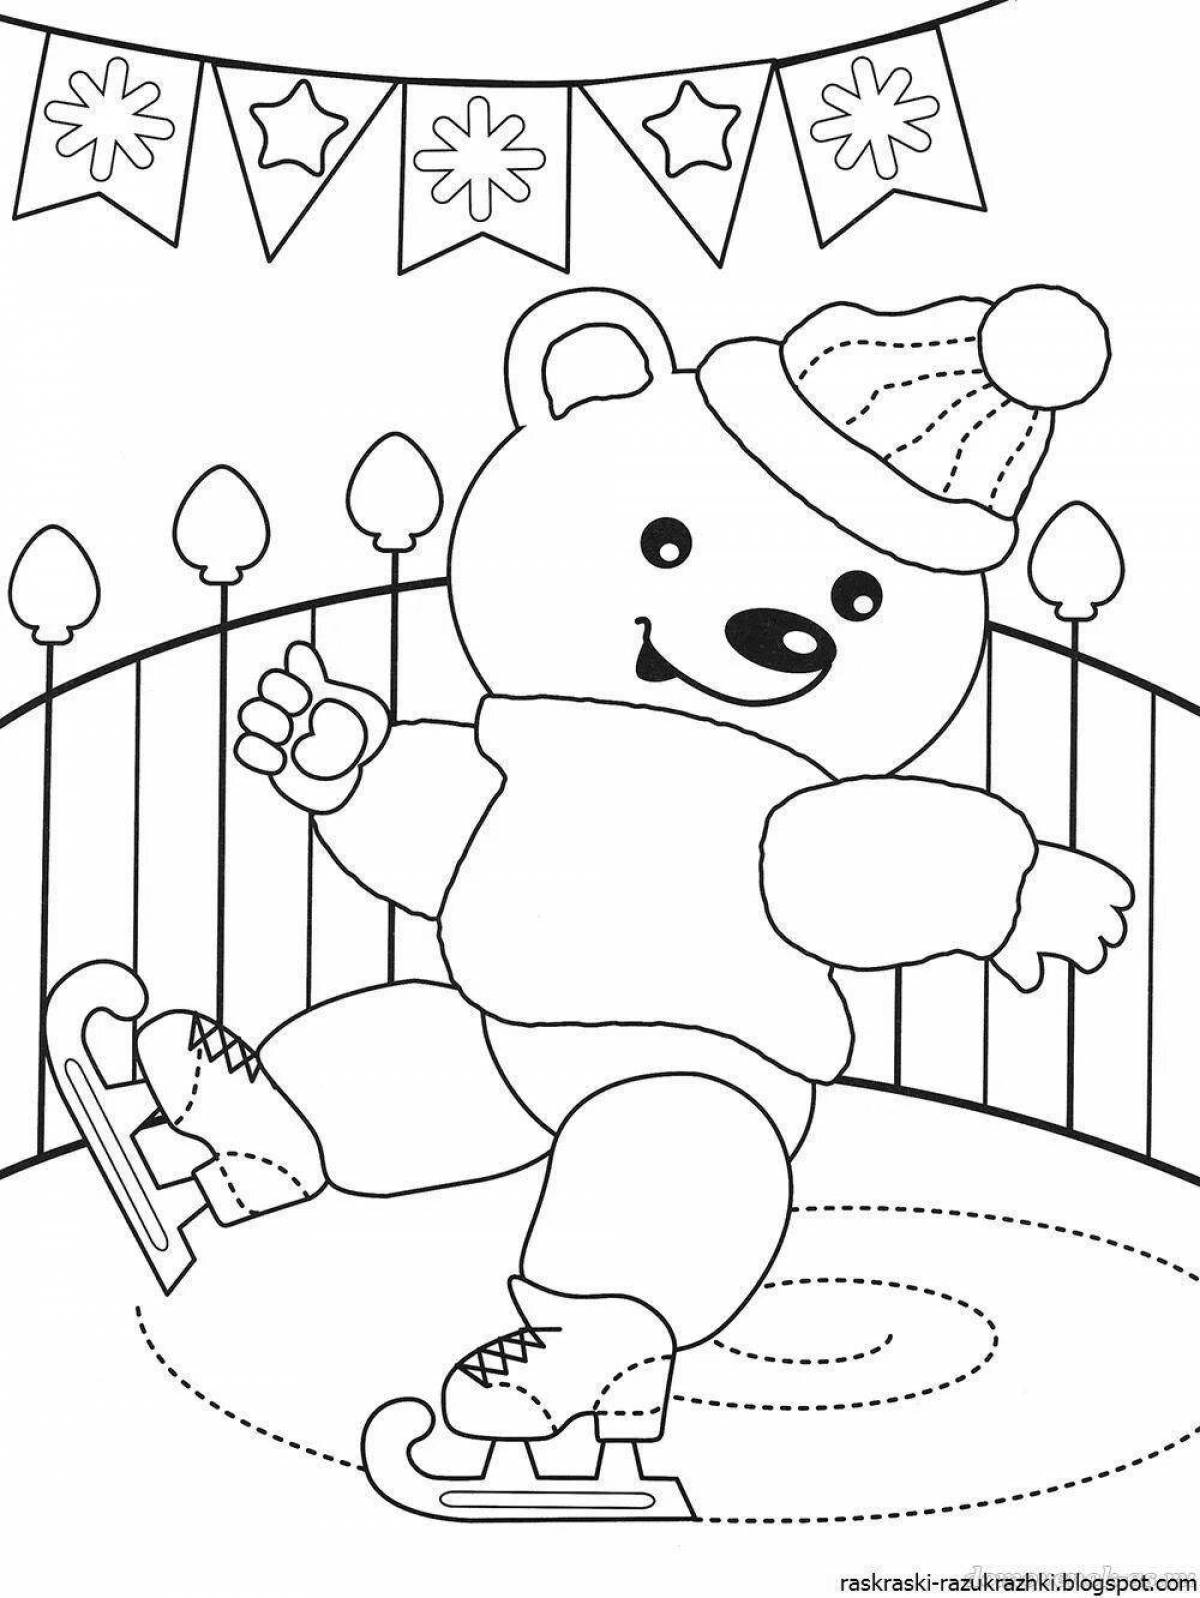 Fantastic winter coloring book for children 8 years old